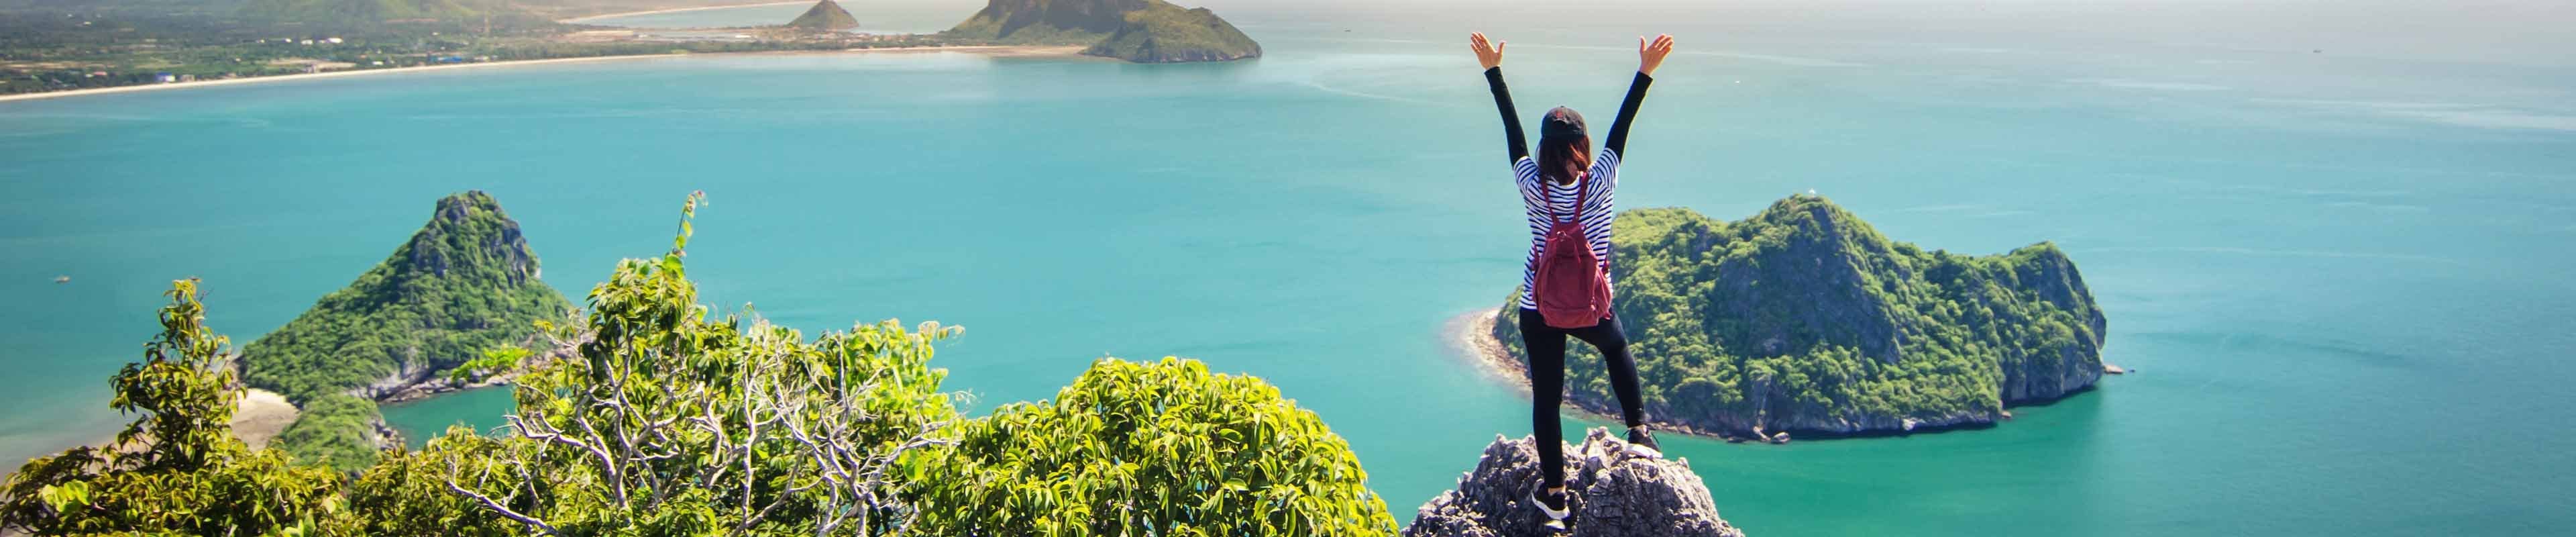 Woman standing on mountaintop overlooking beautiful body of water while traveling.